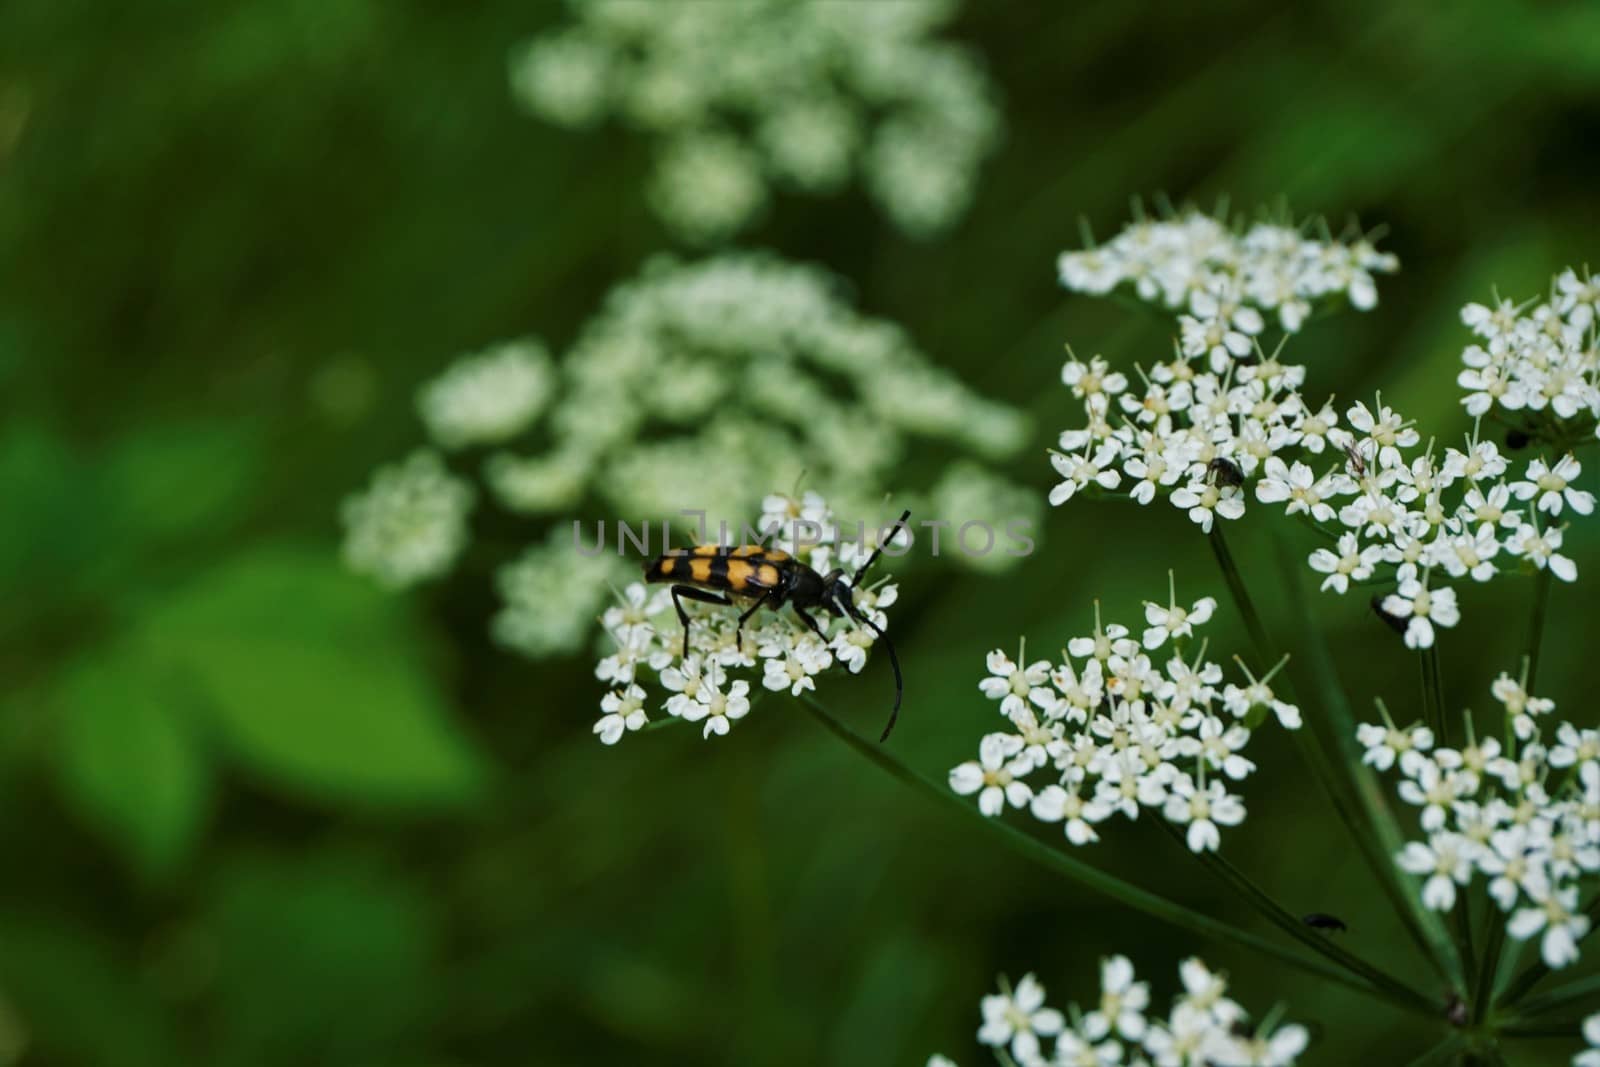 Bunch of Common Yarrow blossoms Achillea millefolium with an orange and black beetle